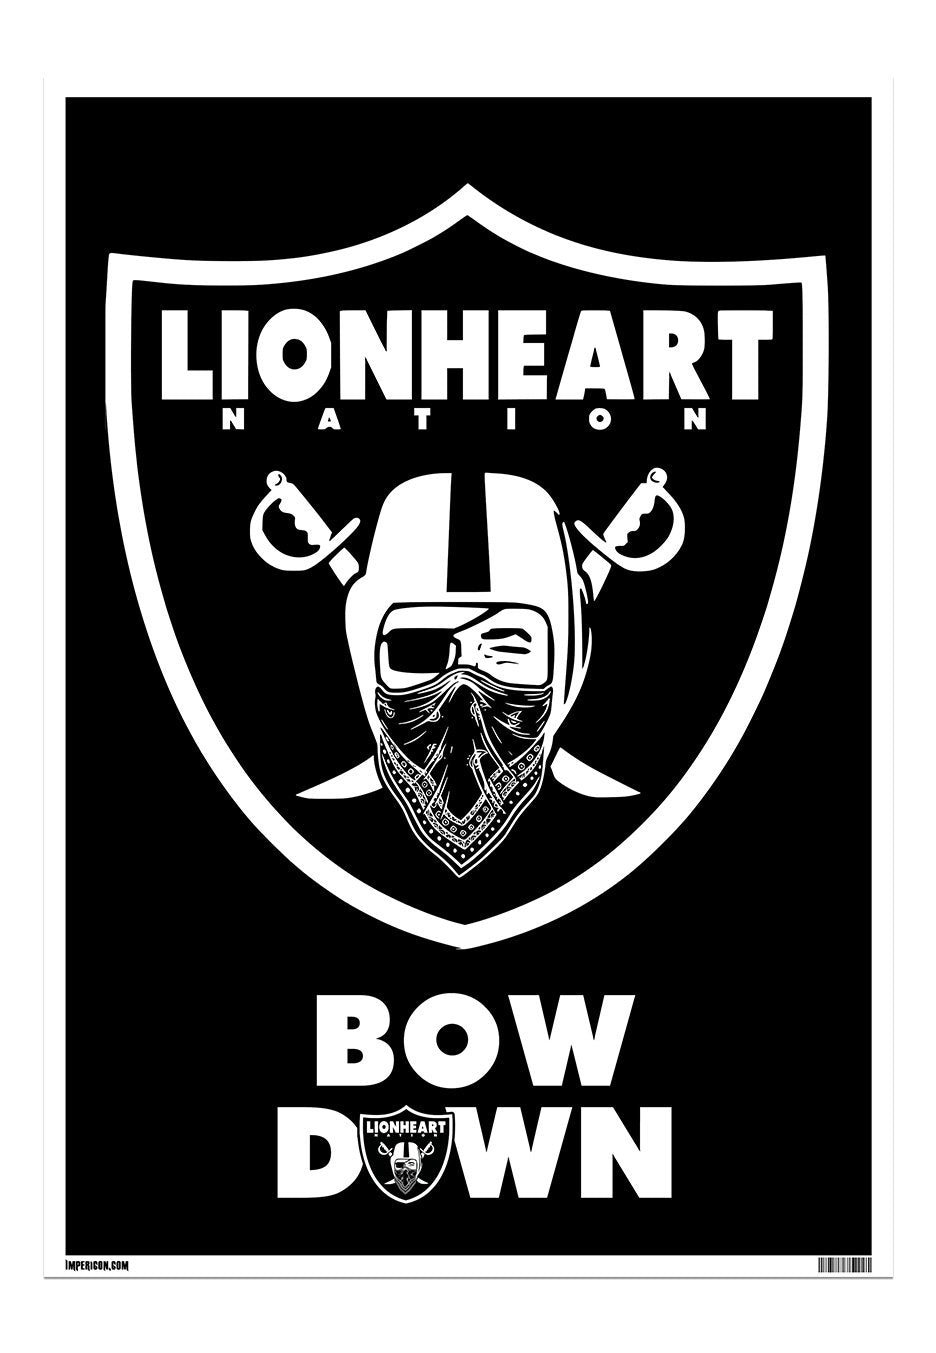 Lionheart - Bow Down - Poster